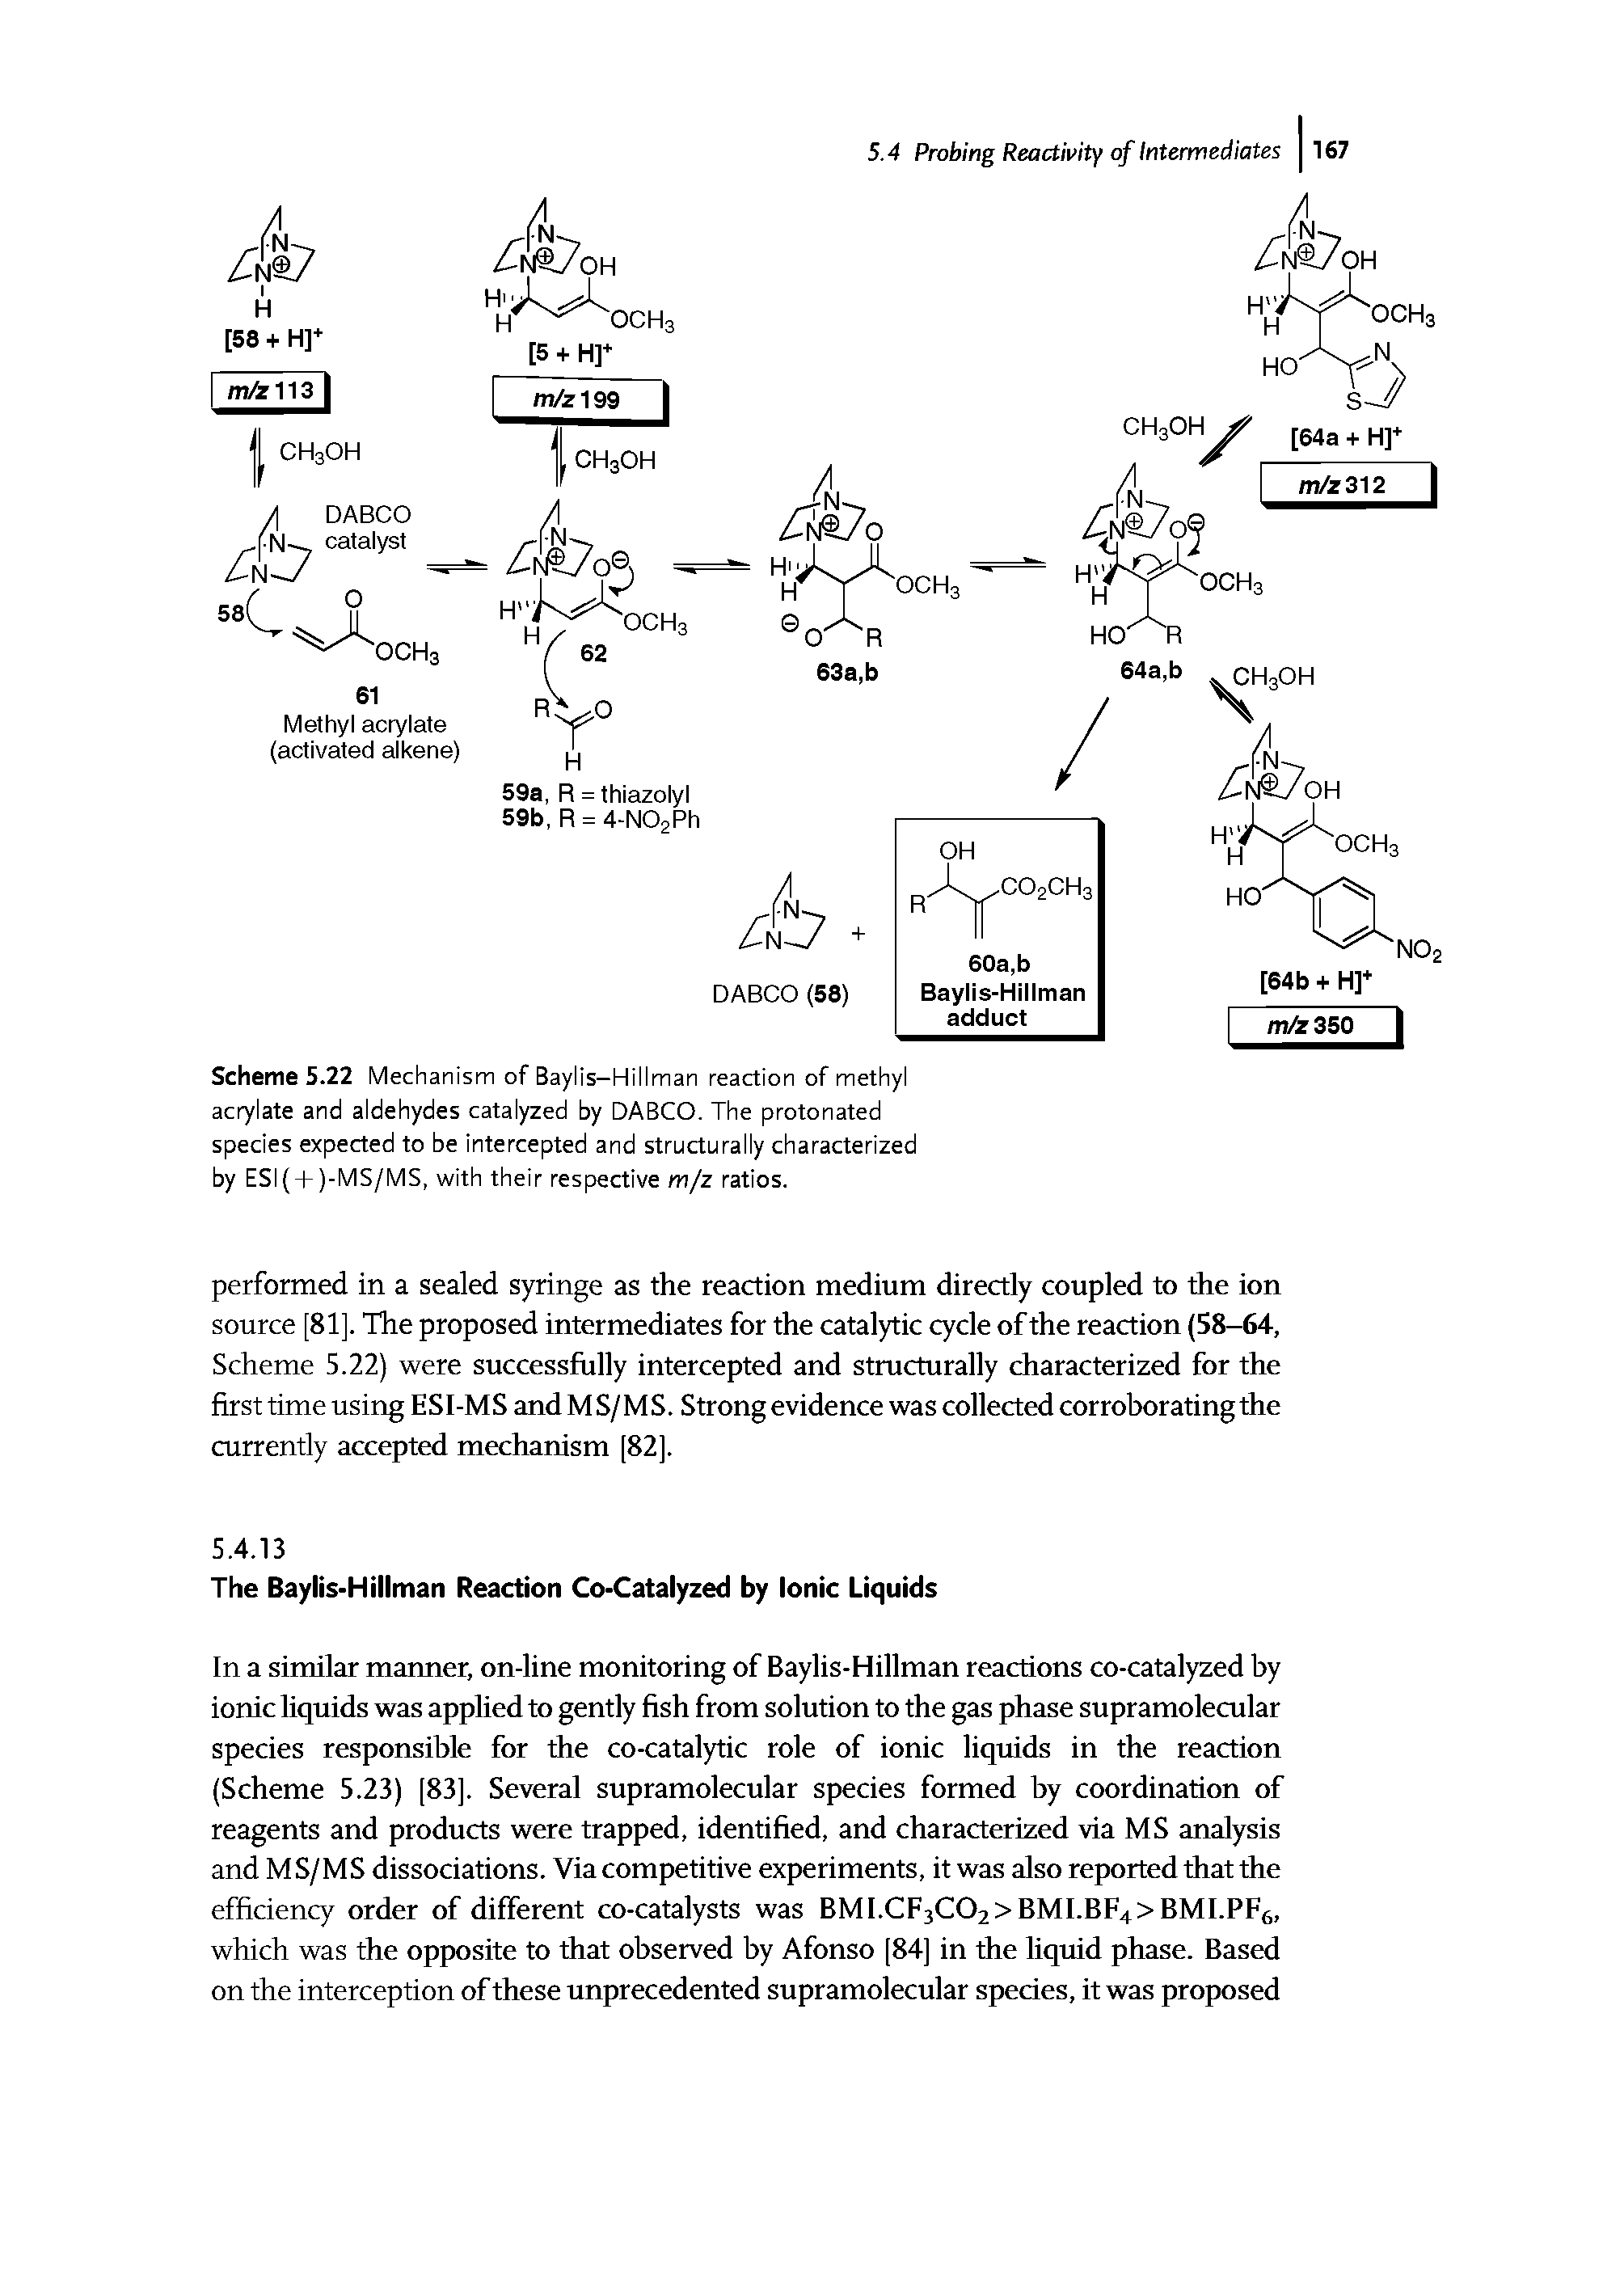 Scheme 5.22 Mechanism of Baylis-Hillman reaction of methyl ac late and aldehydes catalyzed by DABCO. The protonated species expected to be intercepted and strurturally characterized by ESI + )-MS/MS, with their respective m/z ratios.